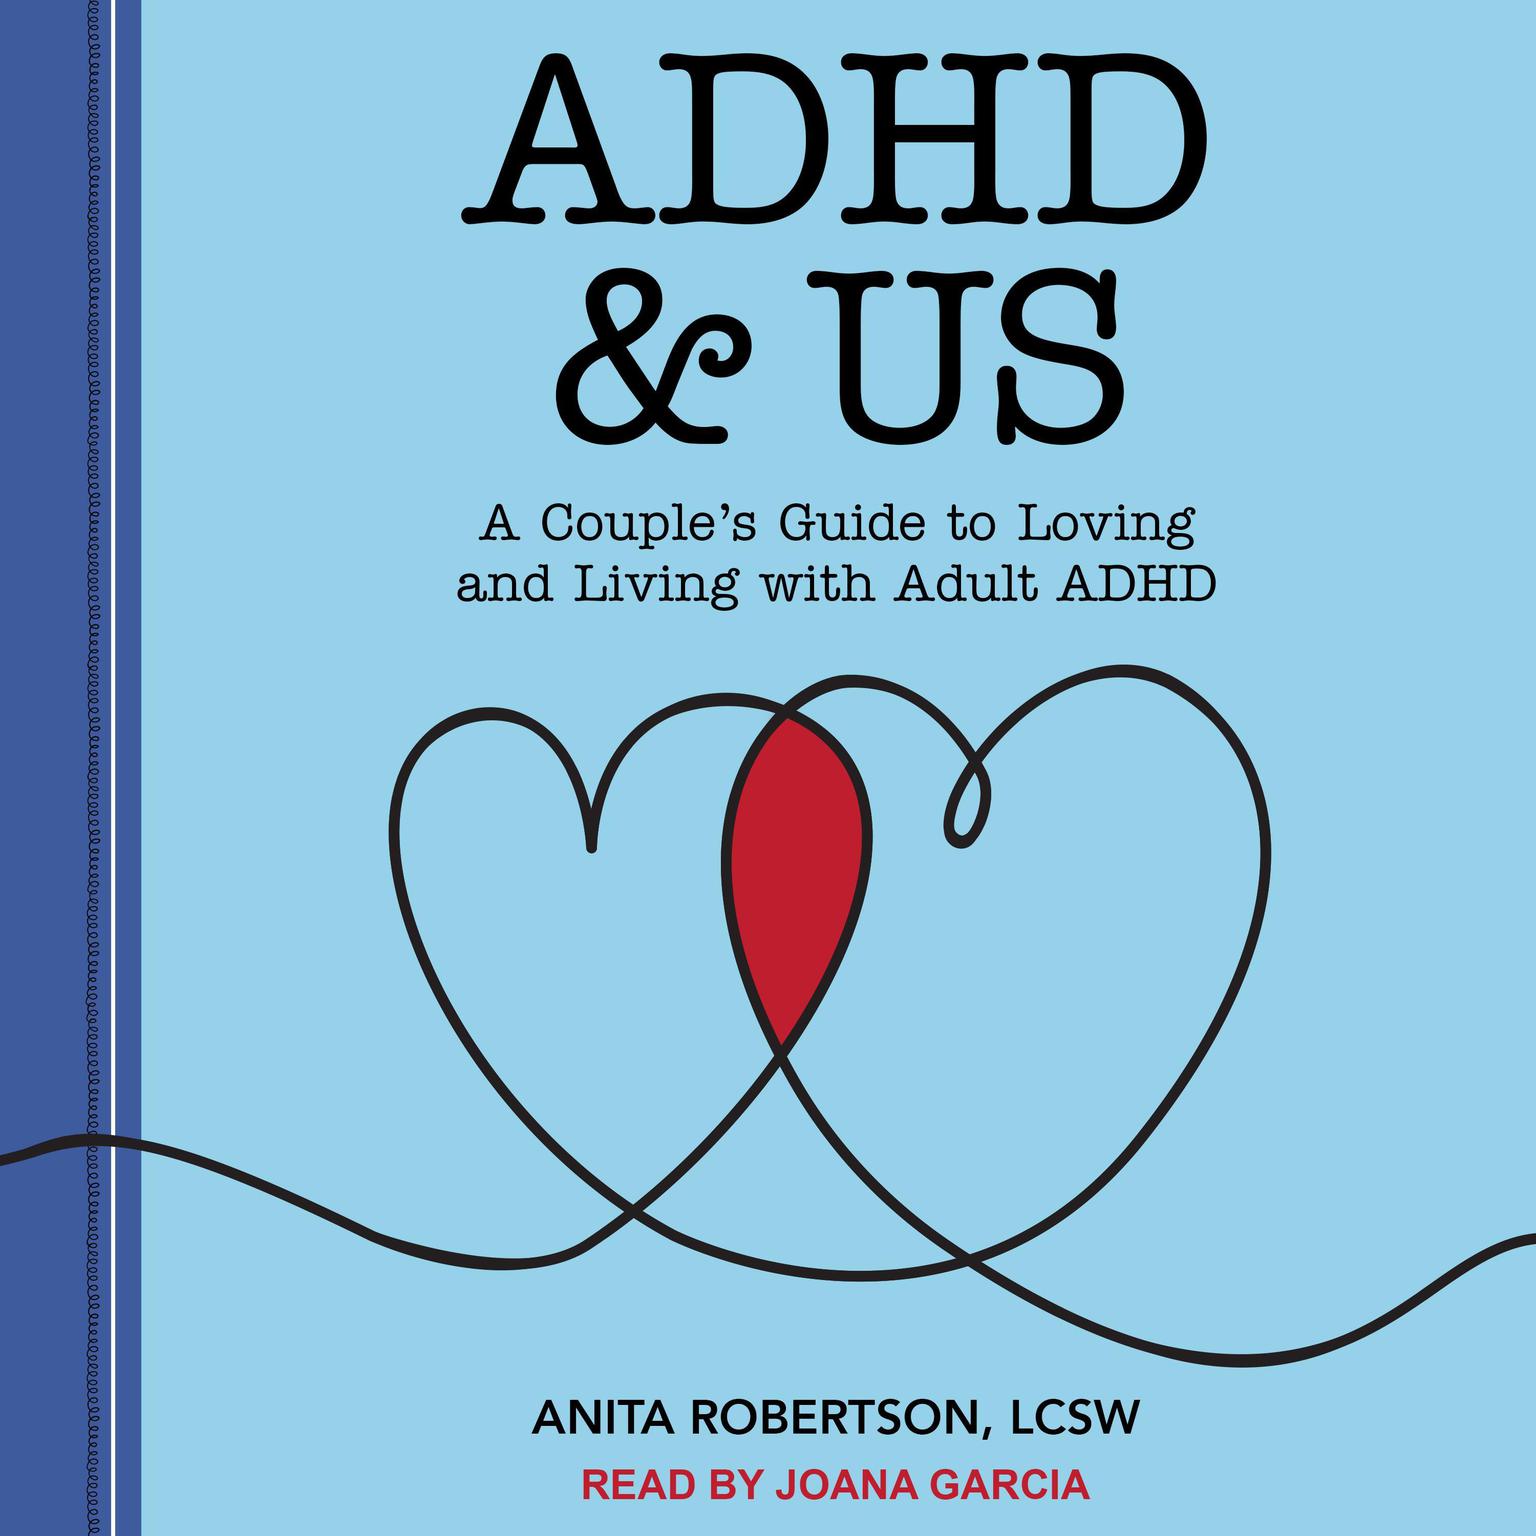 ADHD & Us: A Couples Guide to Loving and Living With Adult ADHD Audiobook, by Anita Robertson, LCSW